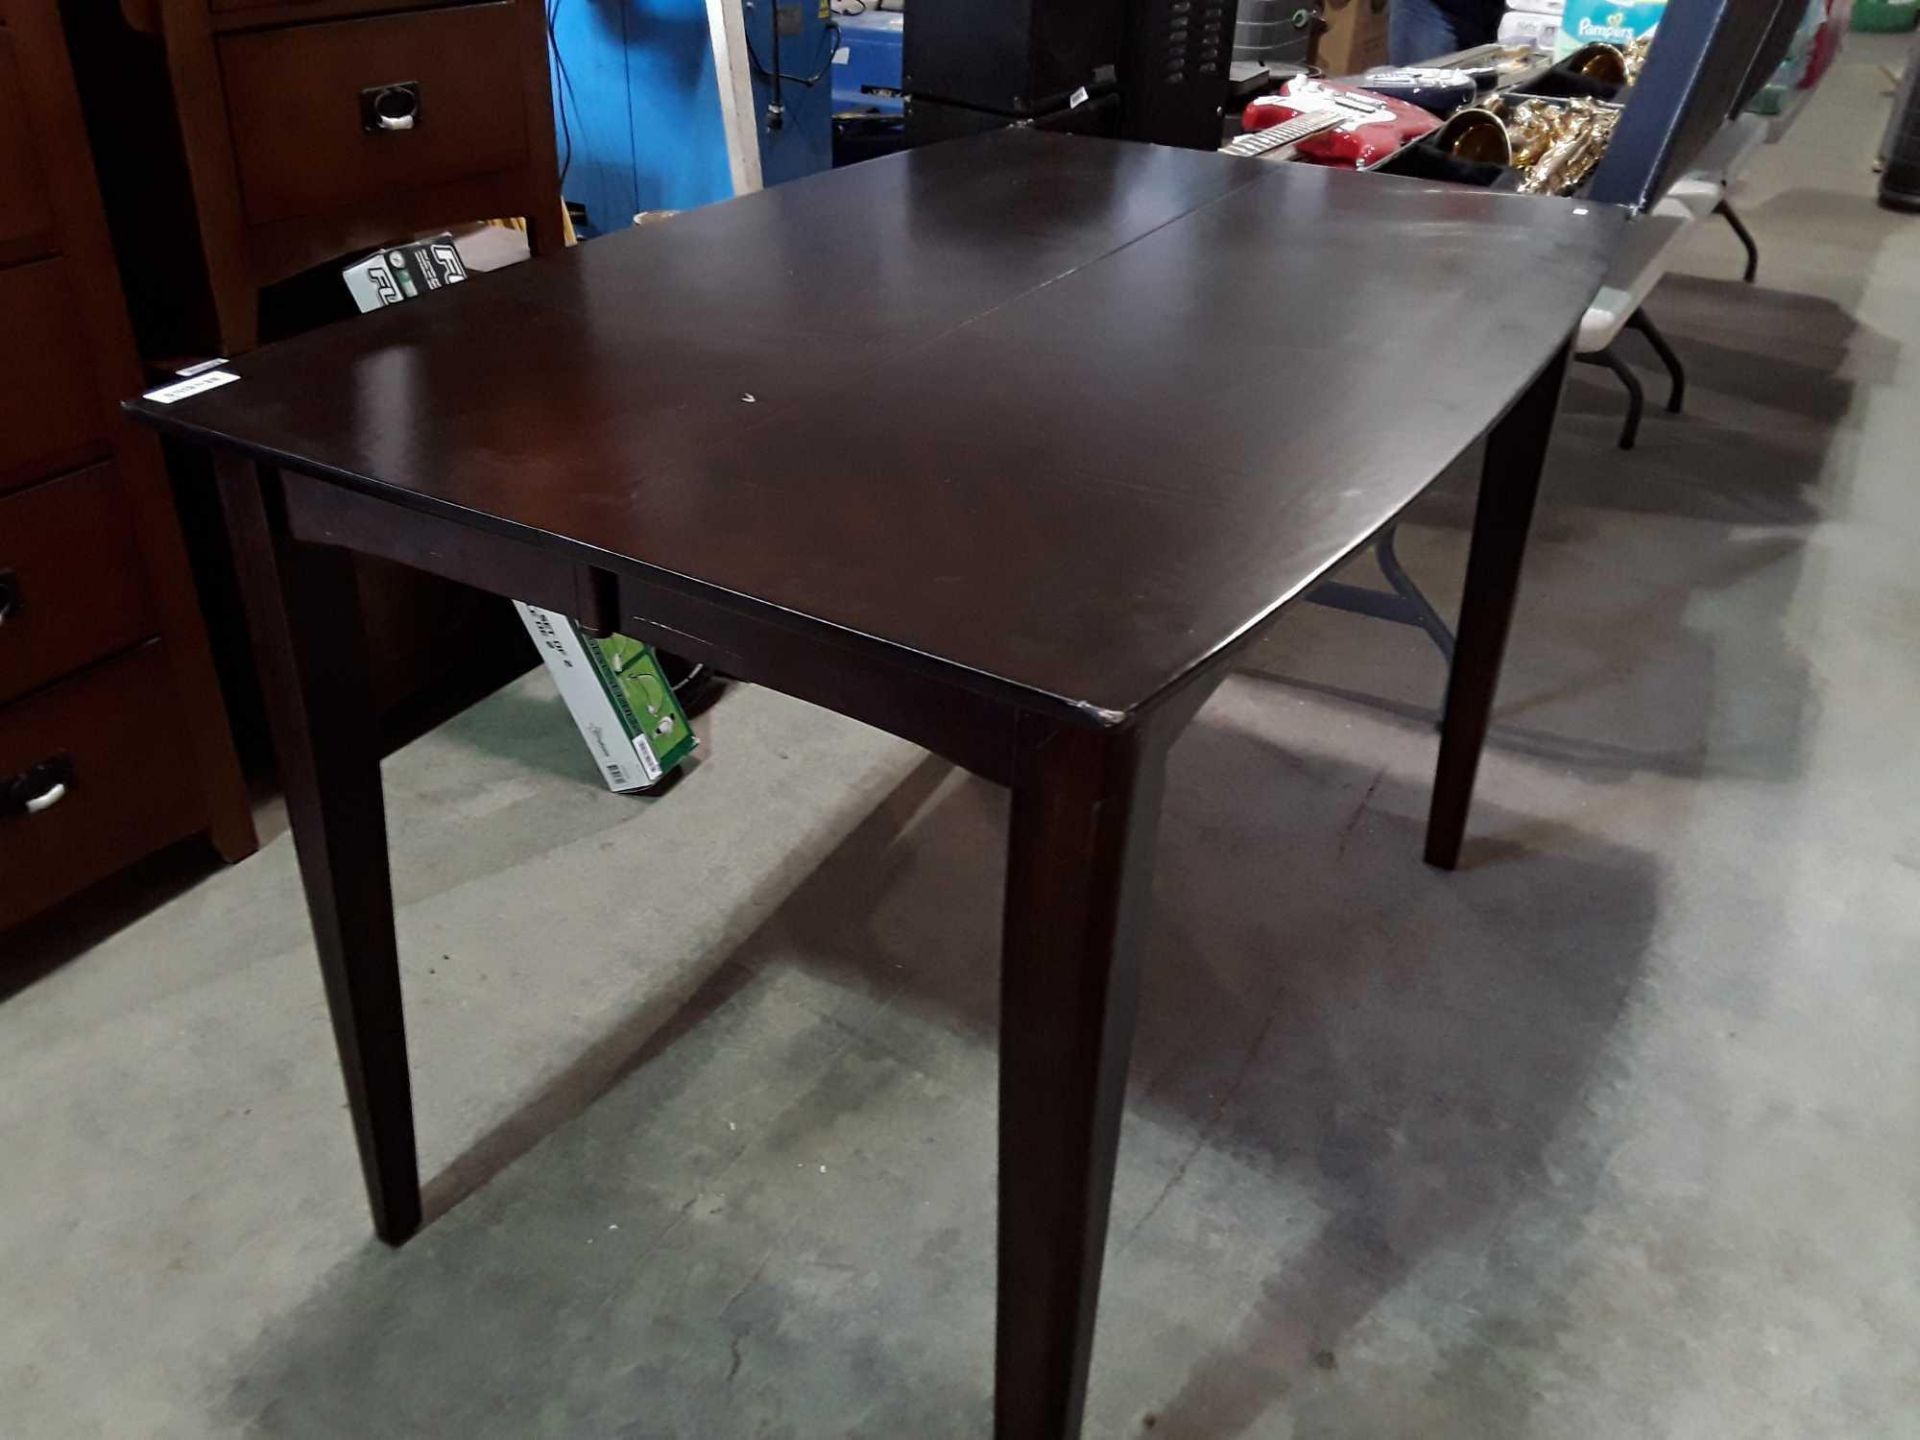 32" x 54" brown dining room table